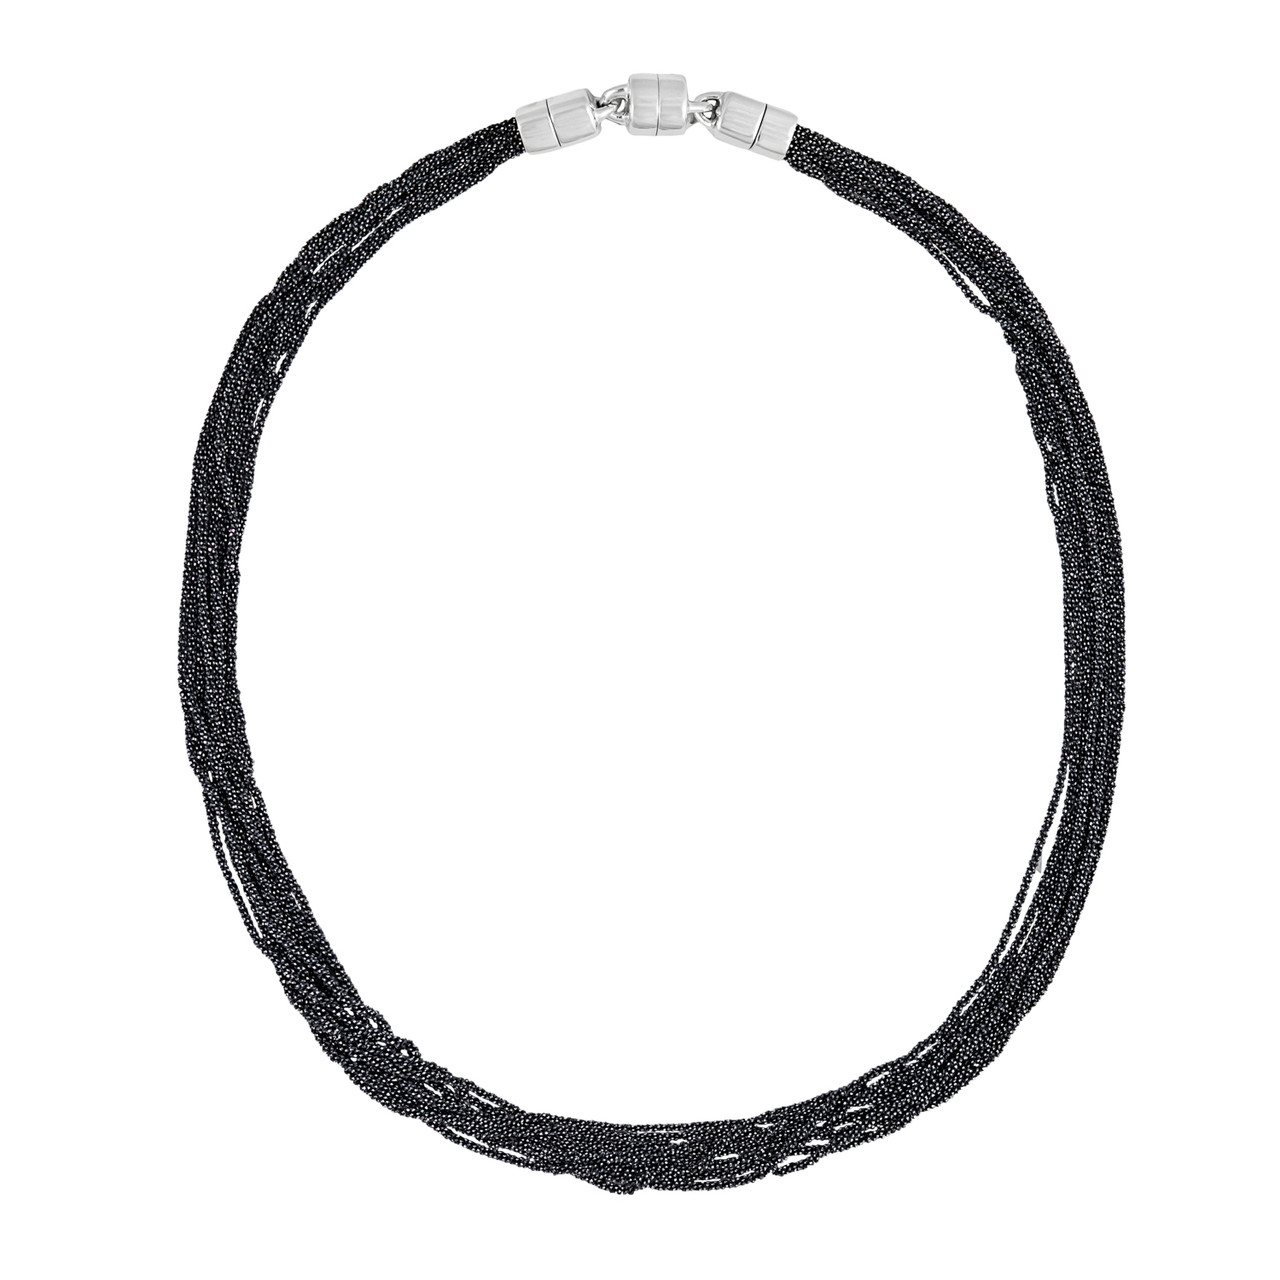 Tomfoolery, Rhodium Plated Silver Multi Chain Necklace, Lindenau